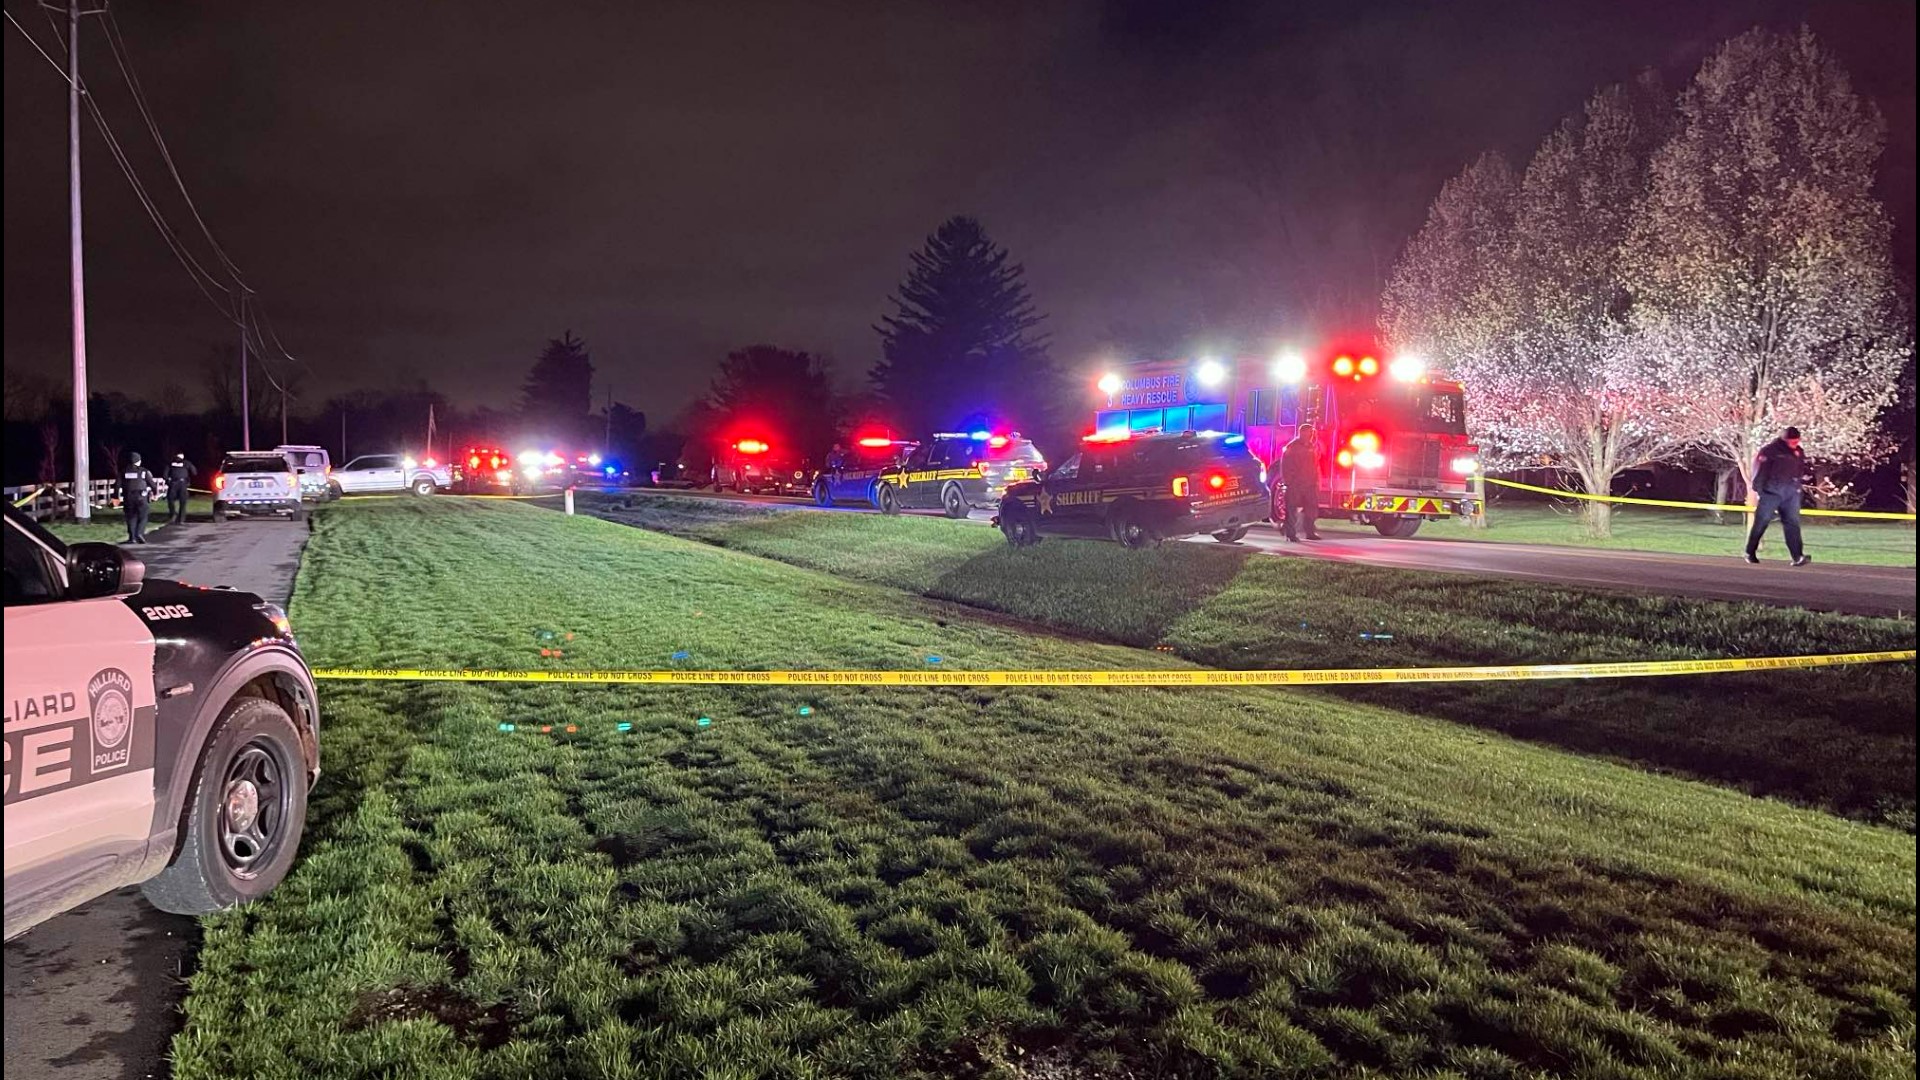 One person is dead after a car overturned in a pond near Hilliard on Friday